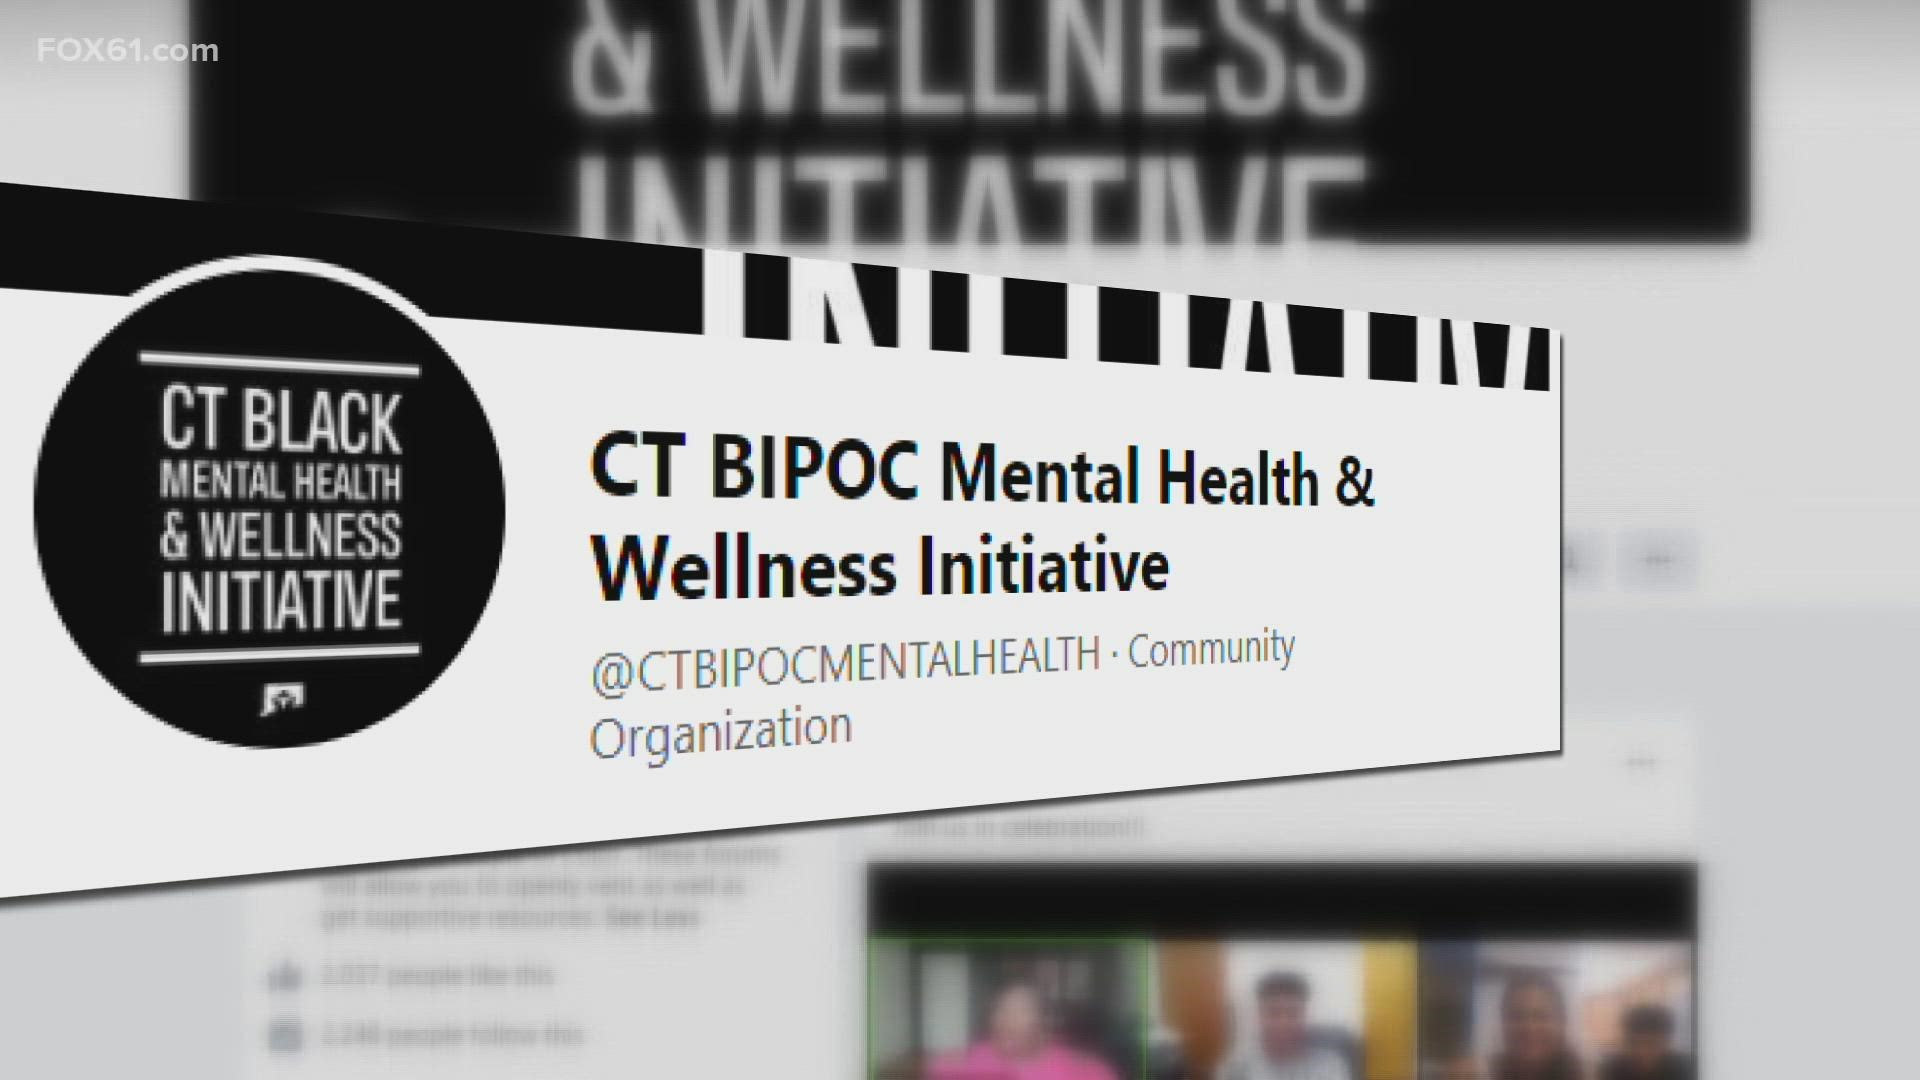 It's aimed to help eliminate disparities in mental health services for minorities across Connecticut.